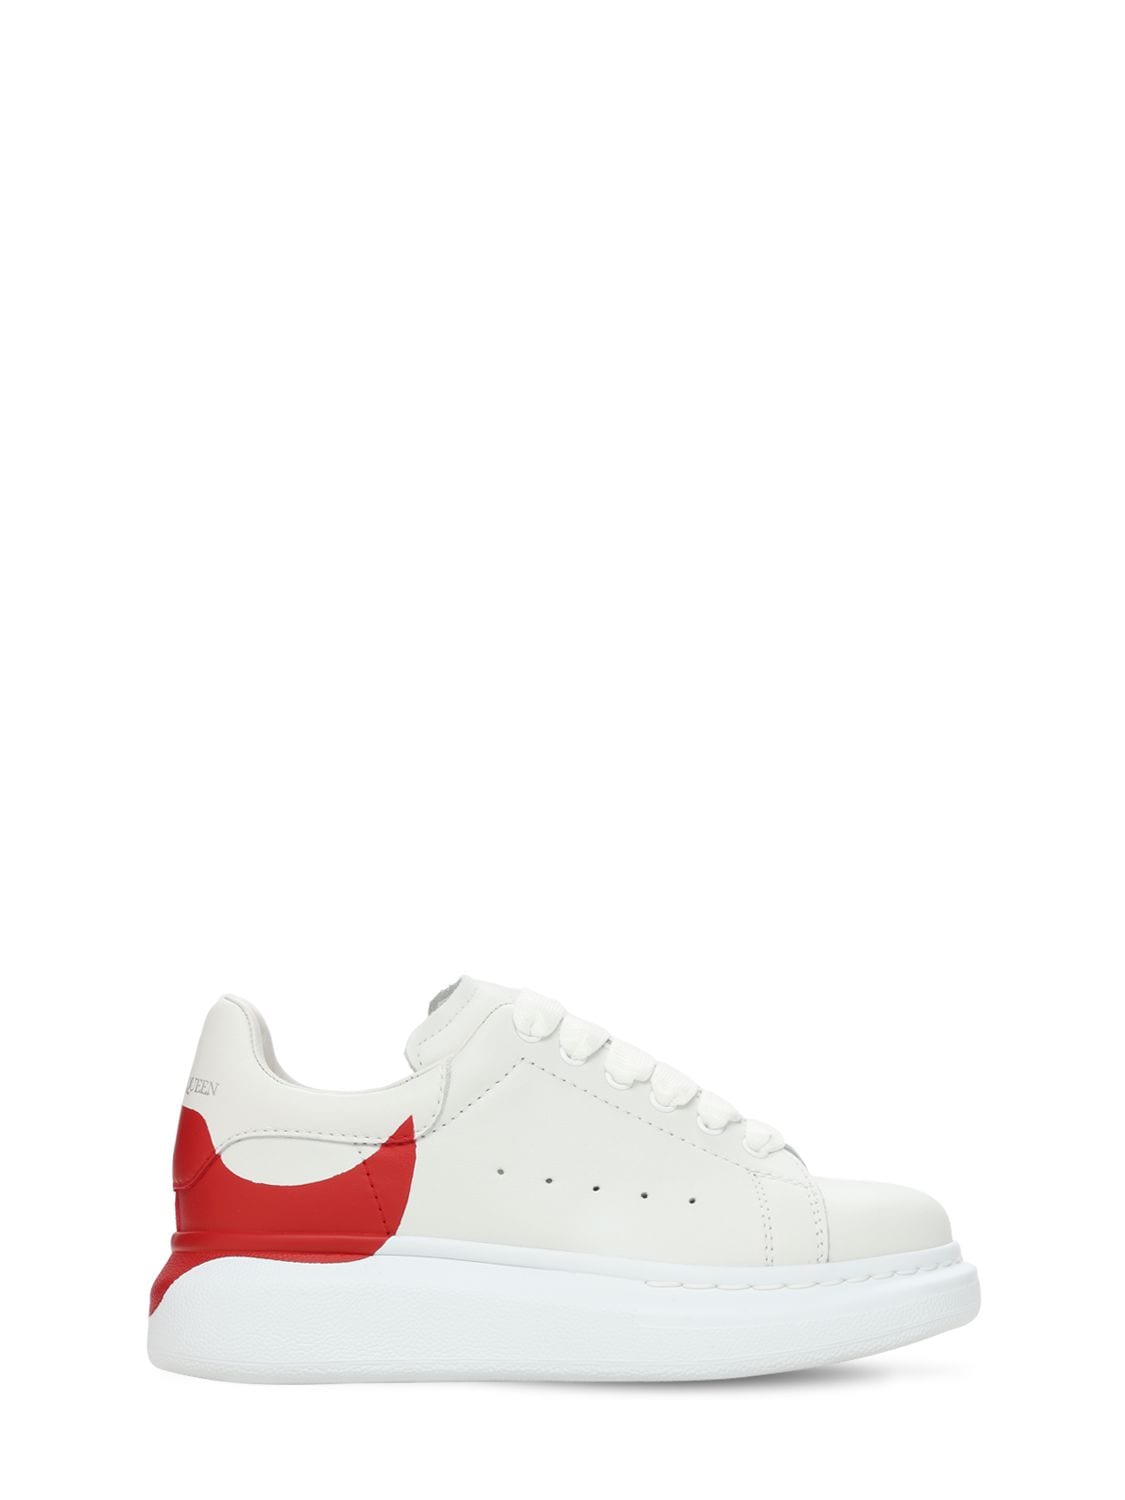 ALEXANDER MCQUEEN LEATHER LACE-UP SNEAKERS,73ILXS006-OTY3NG2